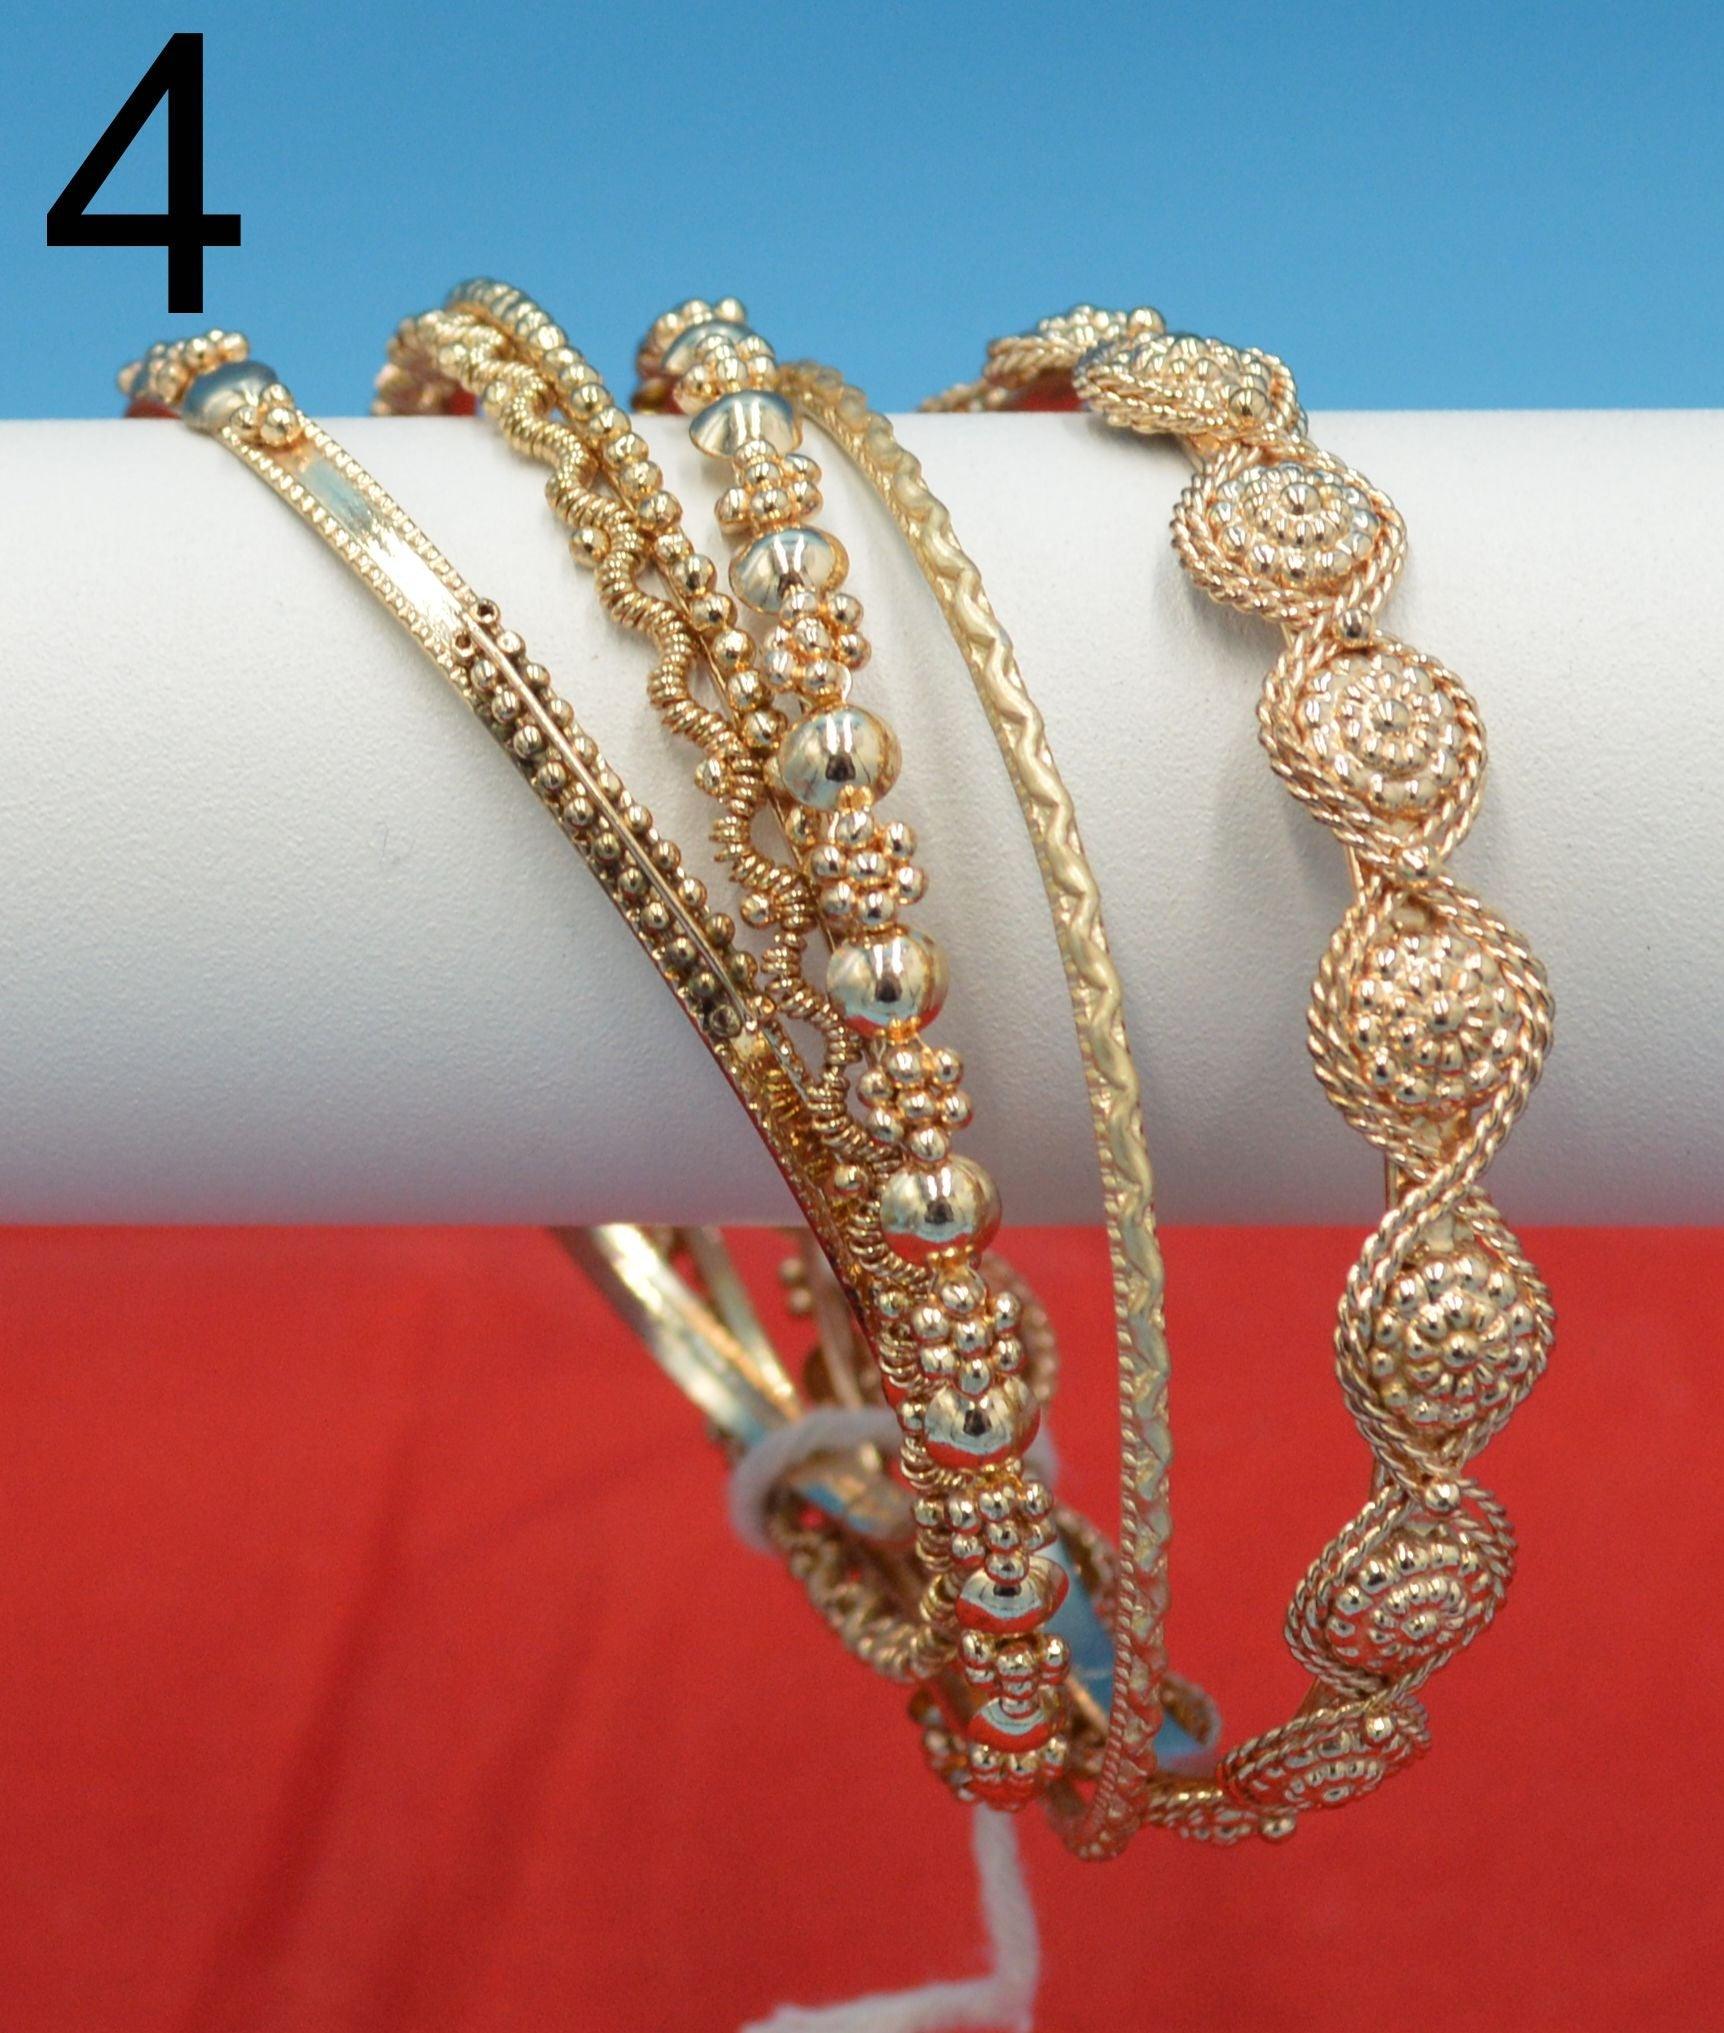 SIX METAL BANGLE BRACELET SETS TO CHOOSE FROM - TMD167207